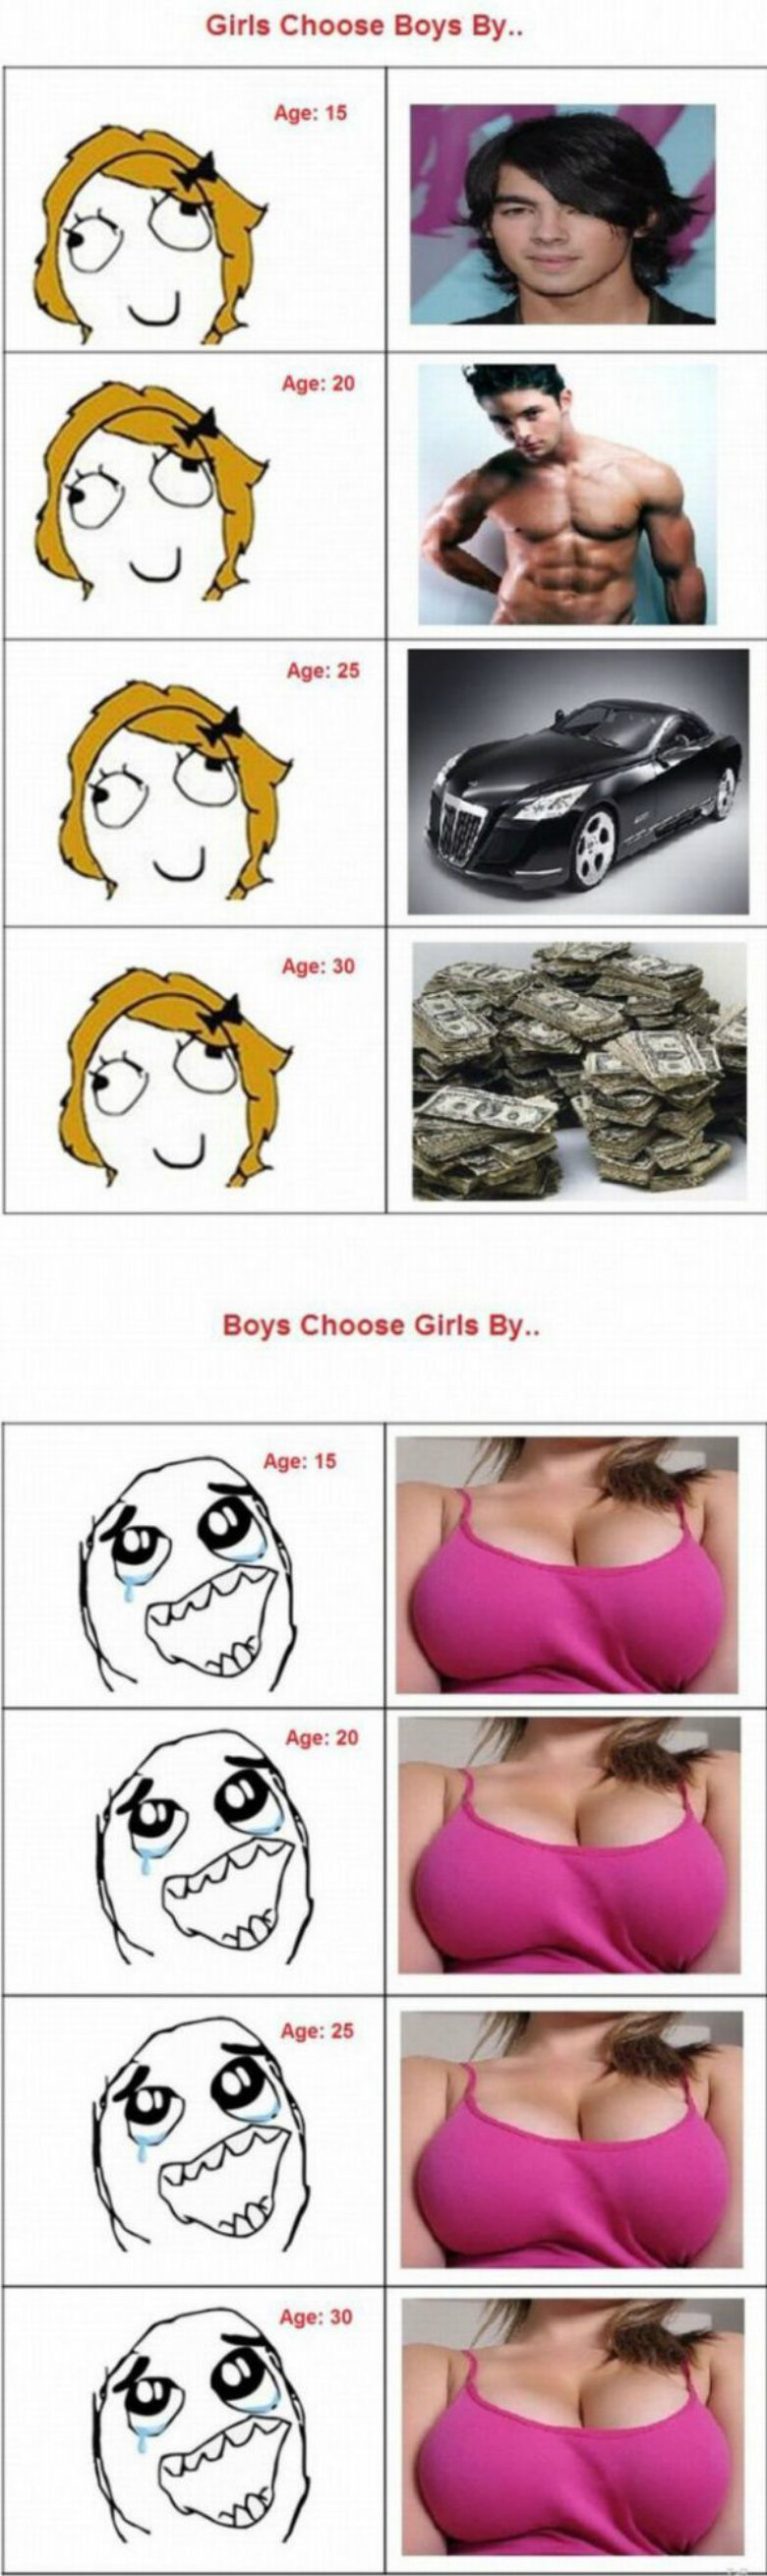 How we choose. . Girls Choose Boys By... At least were consistent...